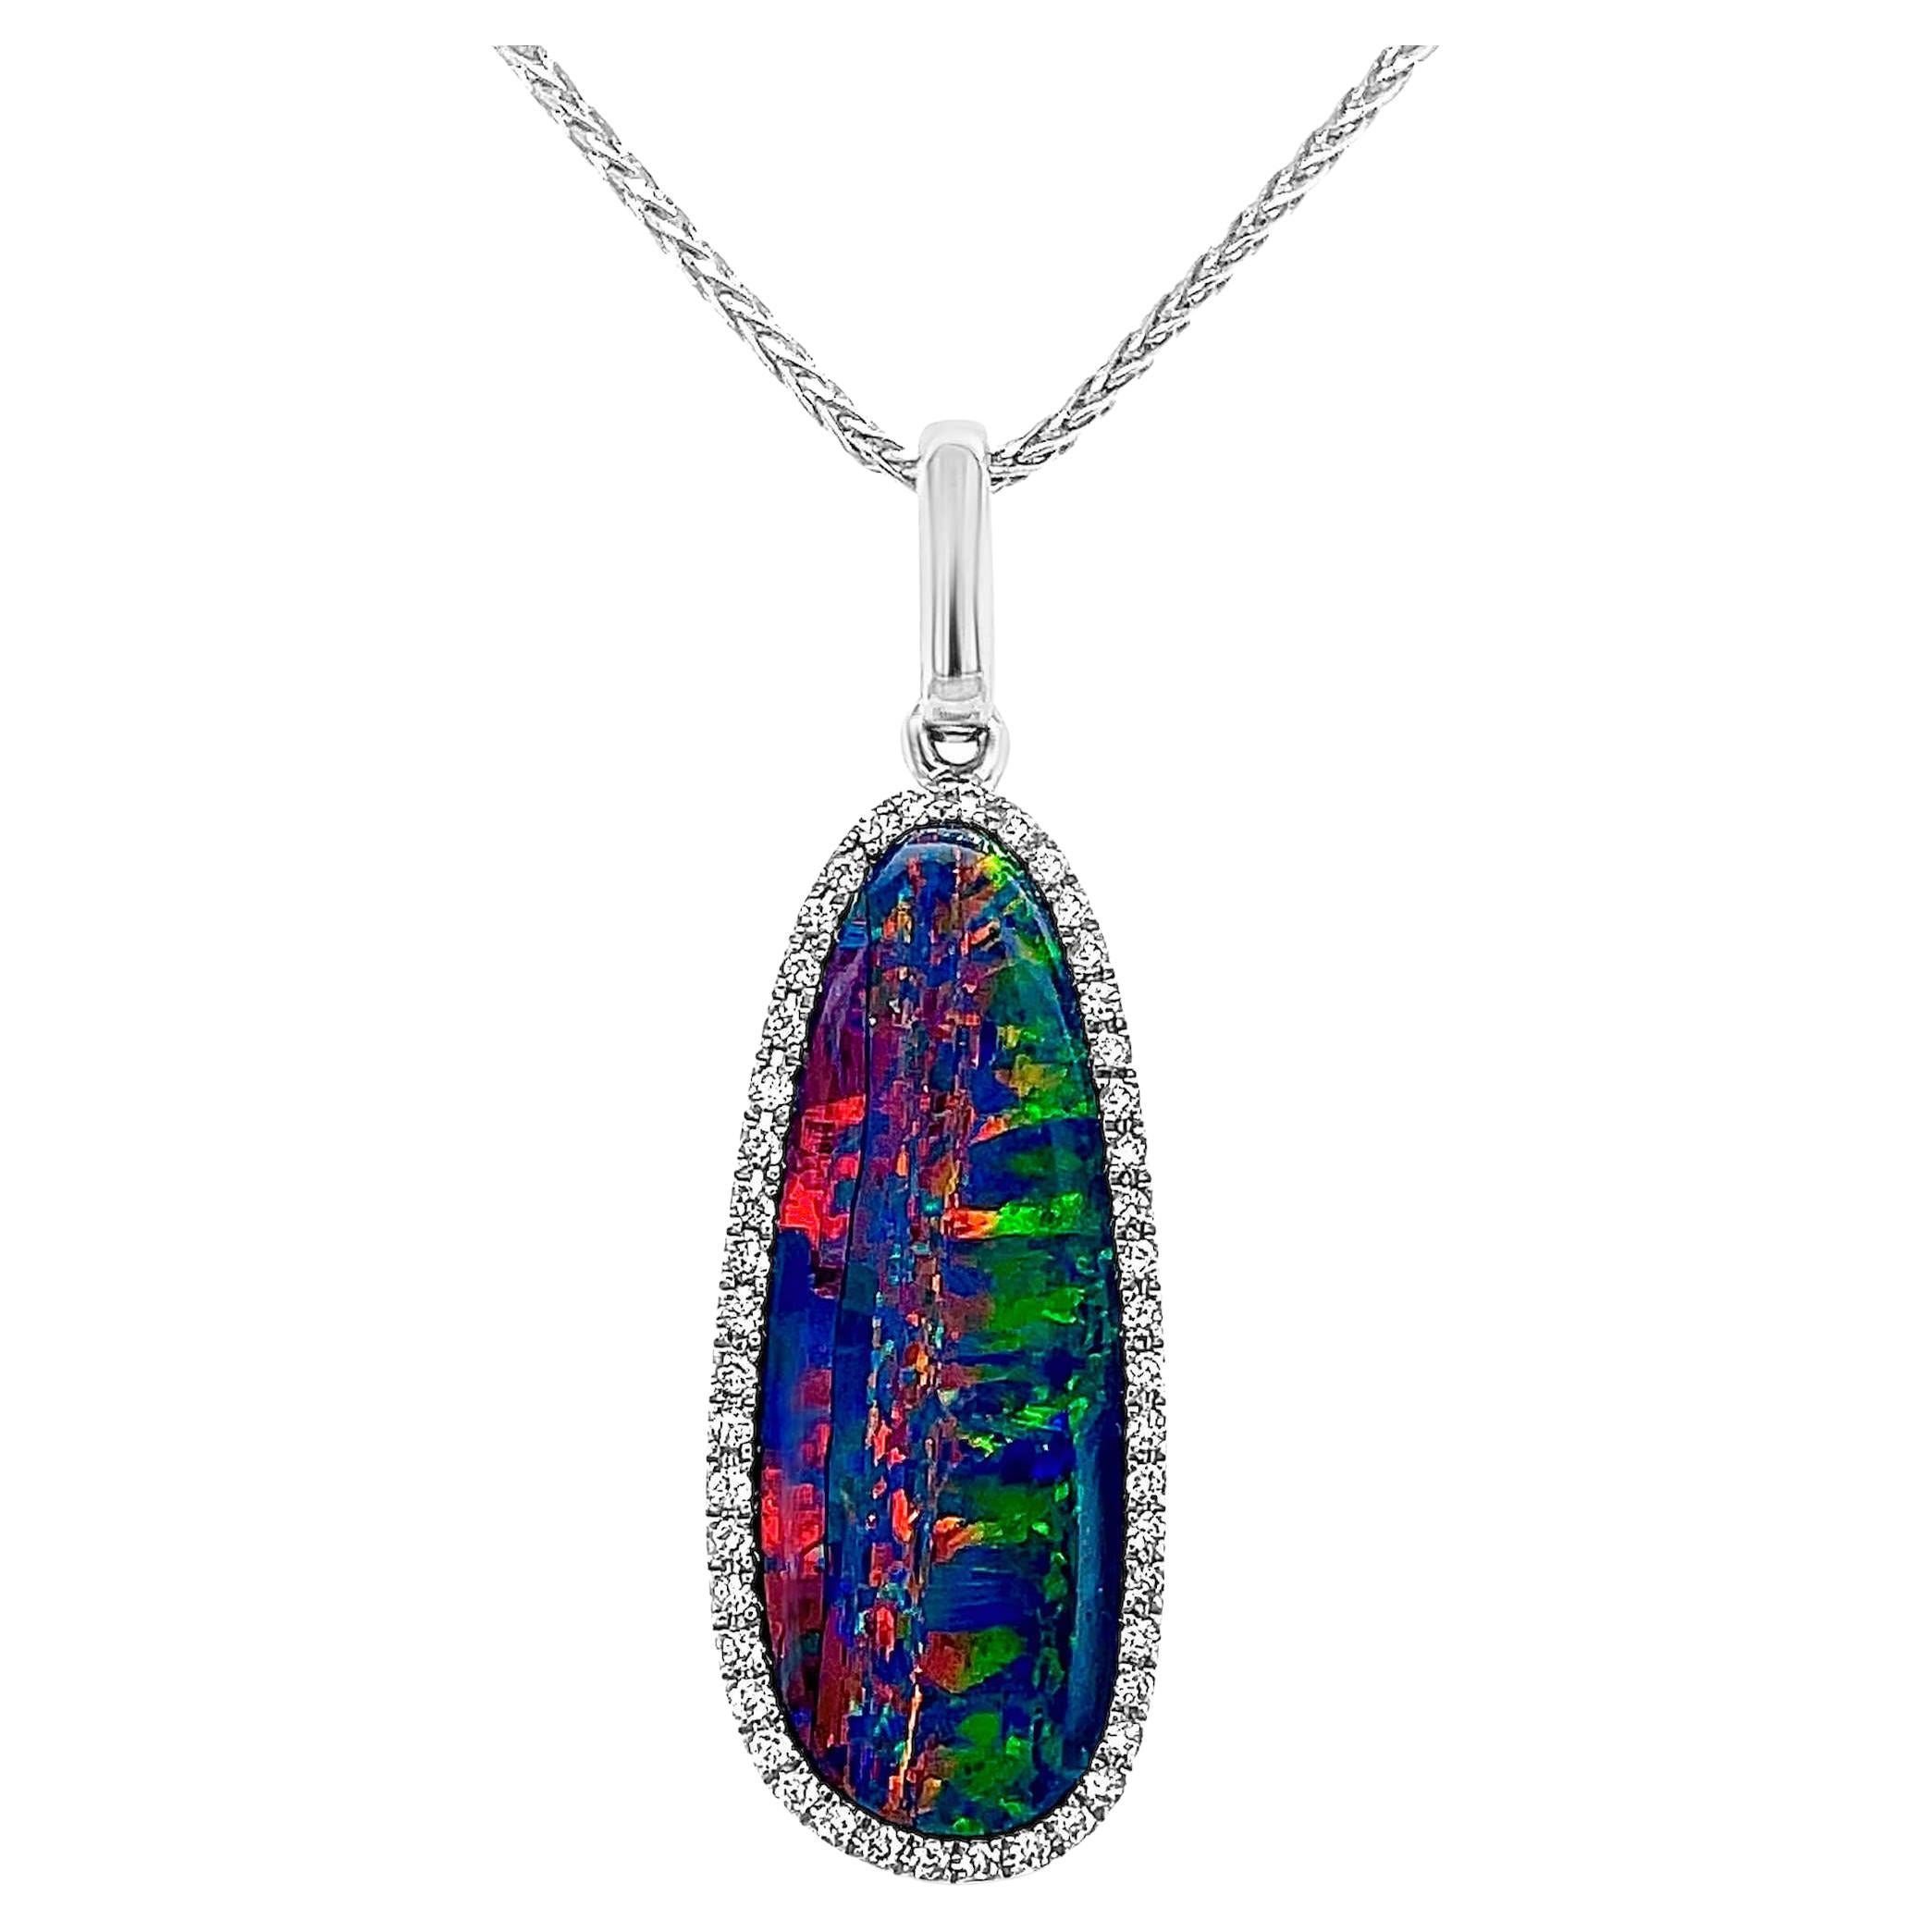 Australian 6.79ct Opal Doublet and Diamond Necklace in 18K White Gold